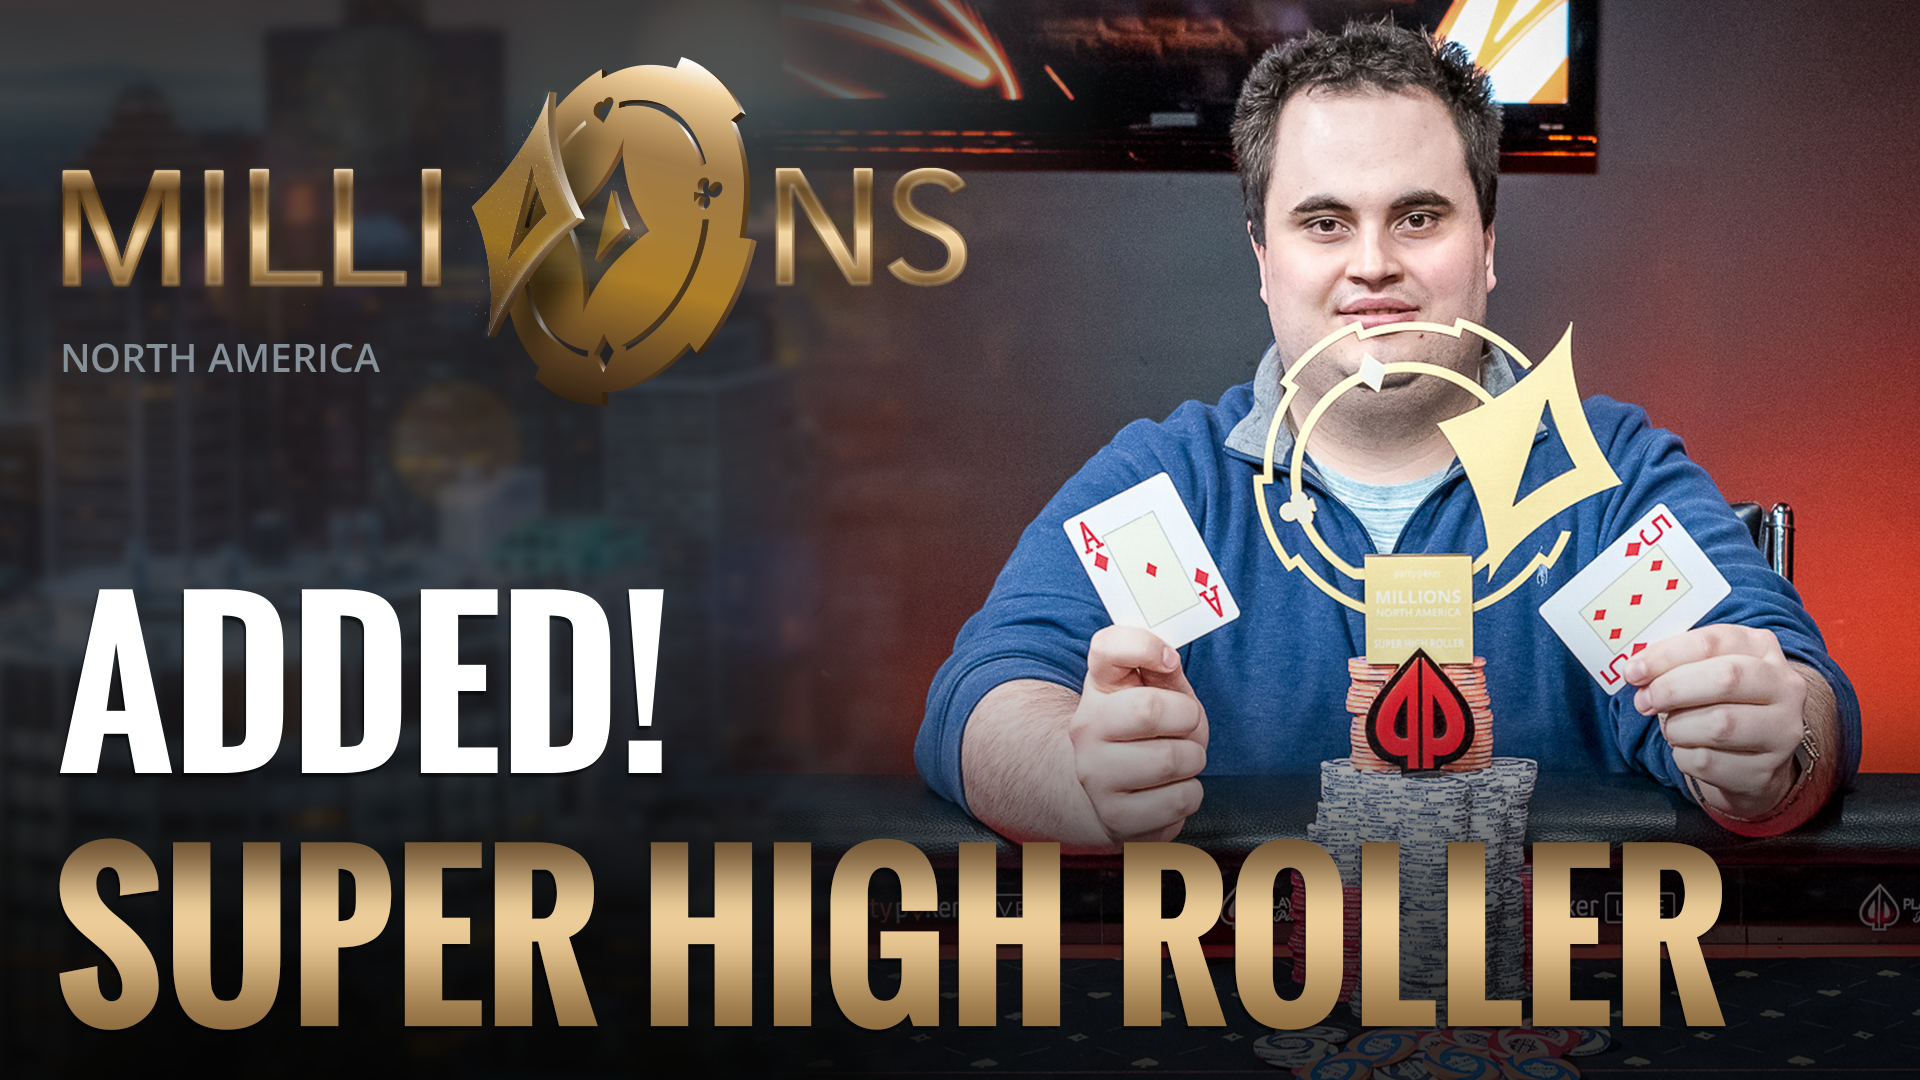 $25K Super High Roller Added to the MILLIONS North America Schedule